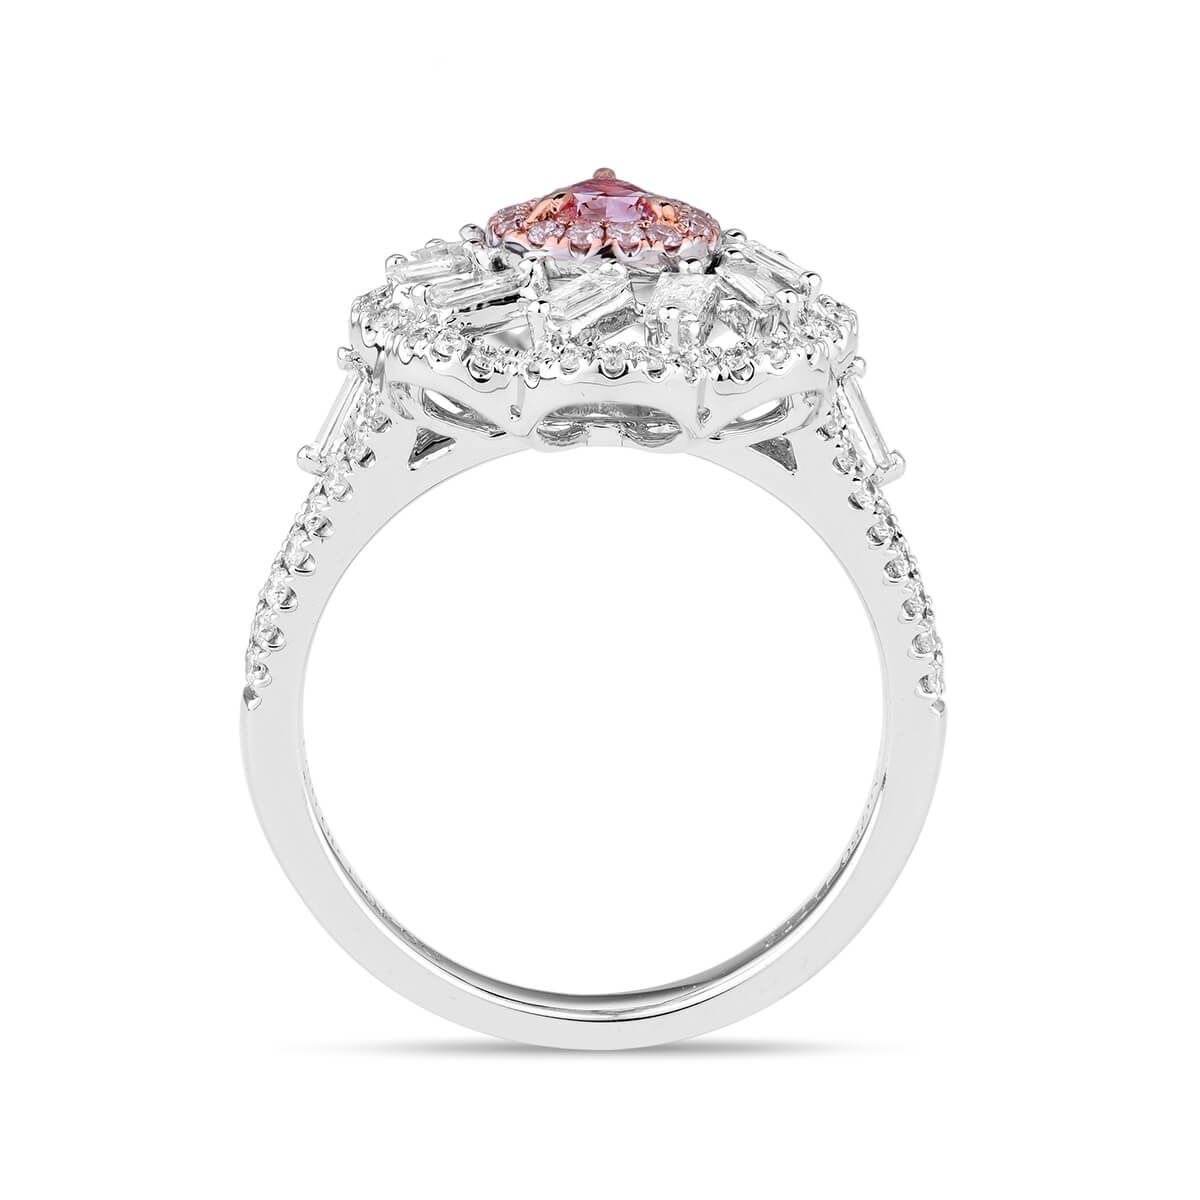 Very Light Pink Diamond Ring, 0.45 Ct. (1.40 Ct. TW), Pear shape, GIA Certified, 5191307870